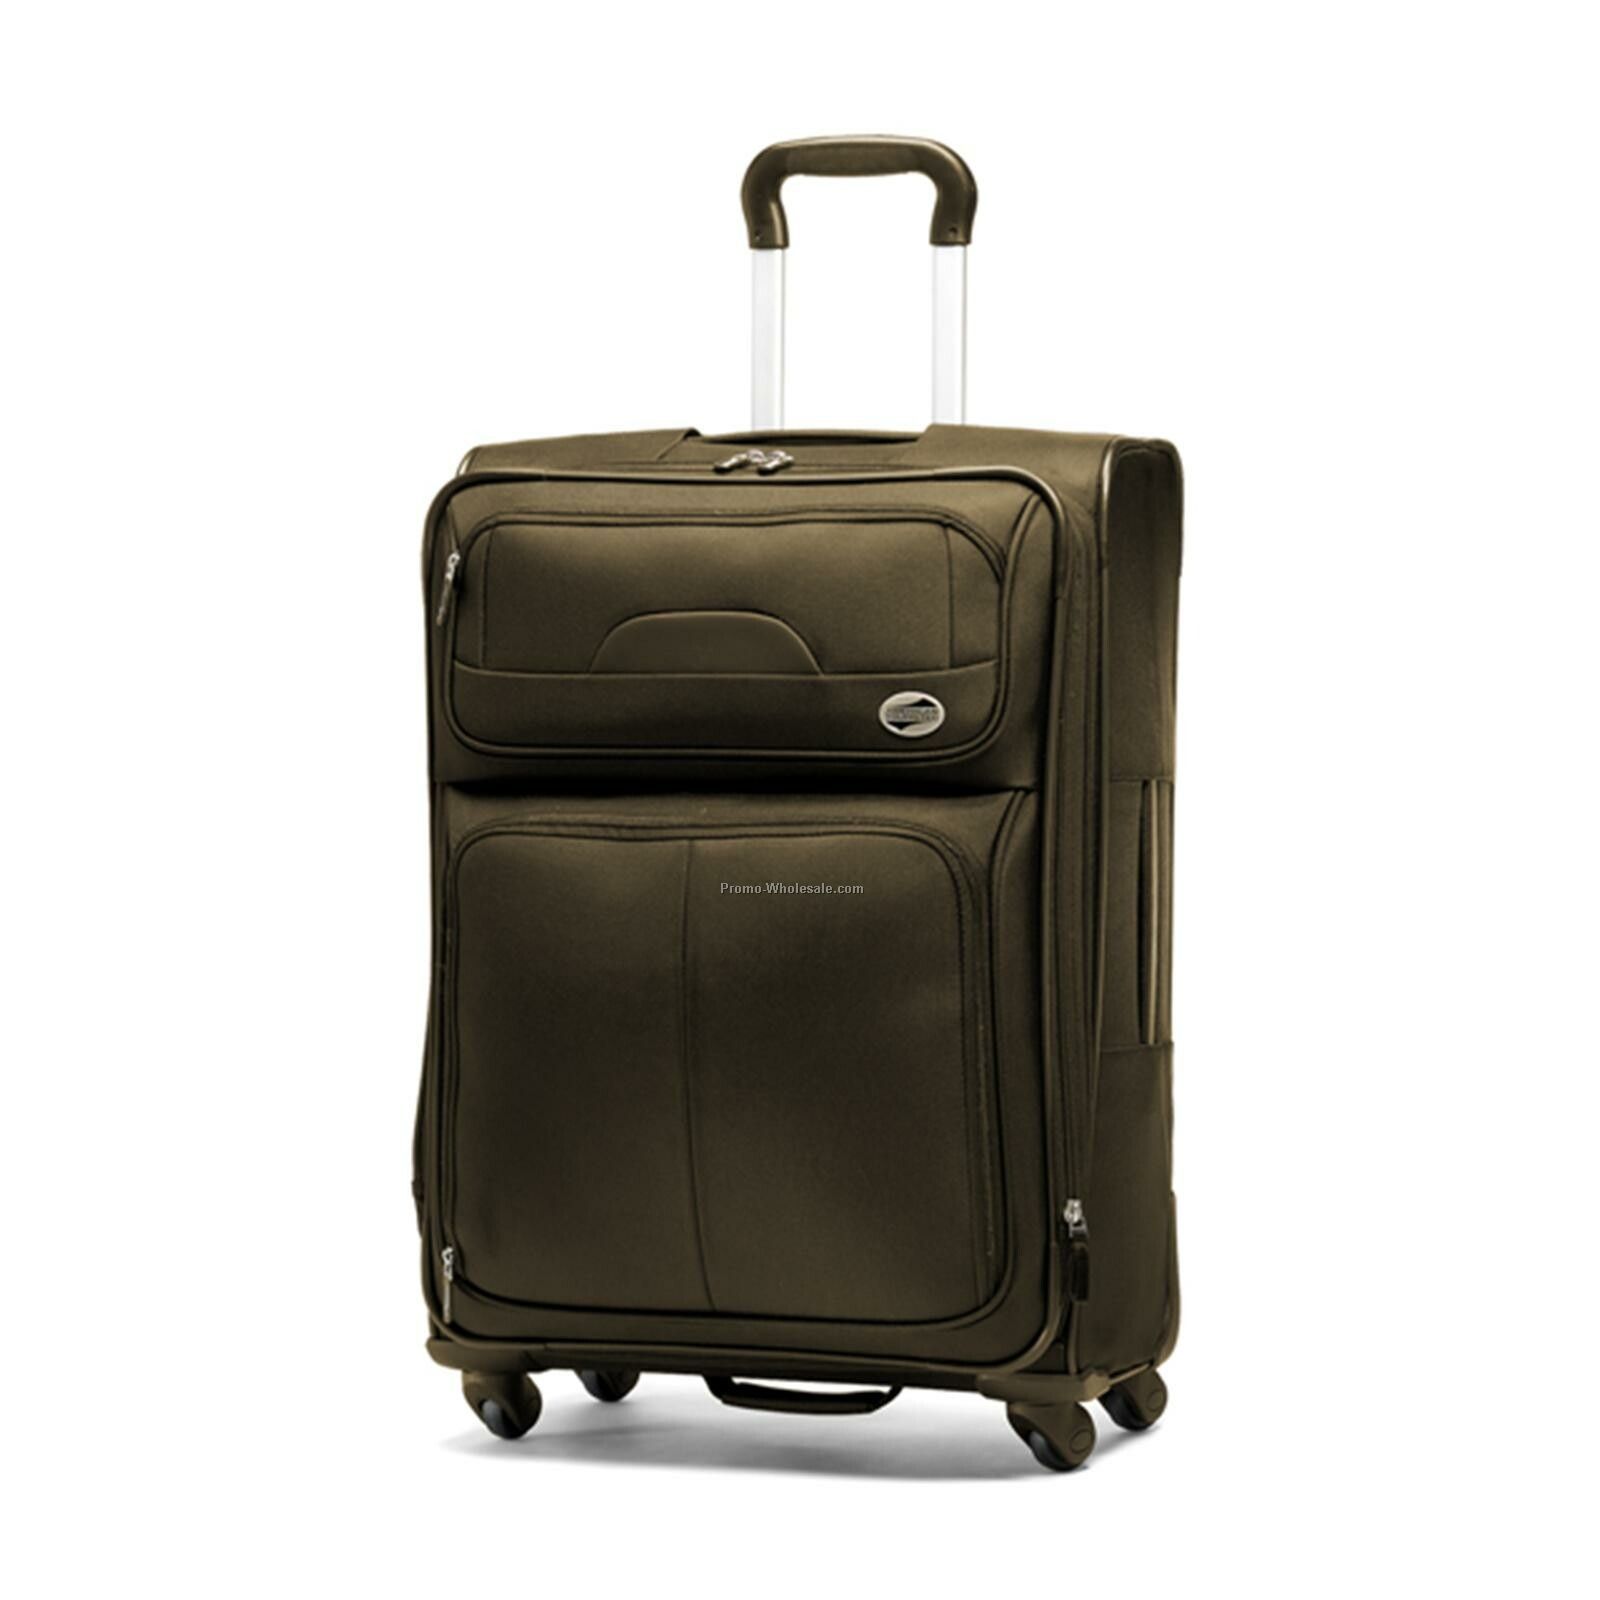 American Tourister Tribute 25" Spinner Upright Luggage